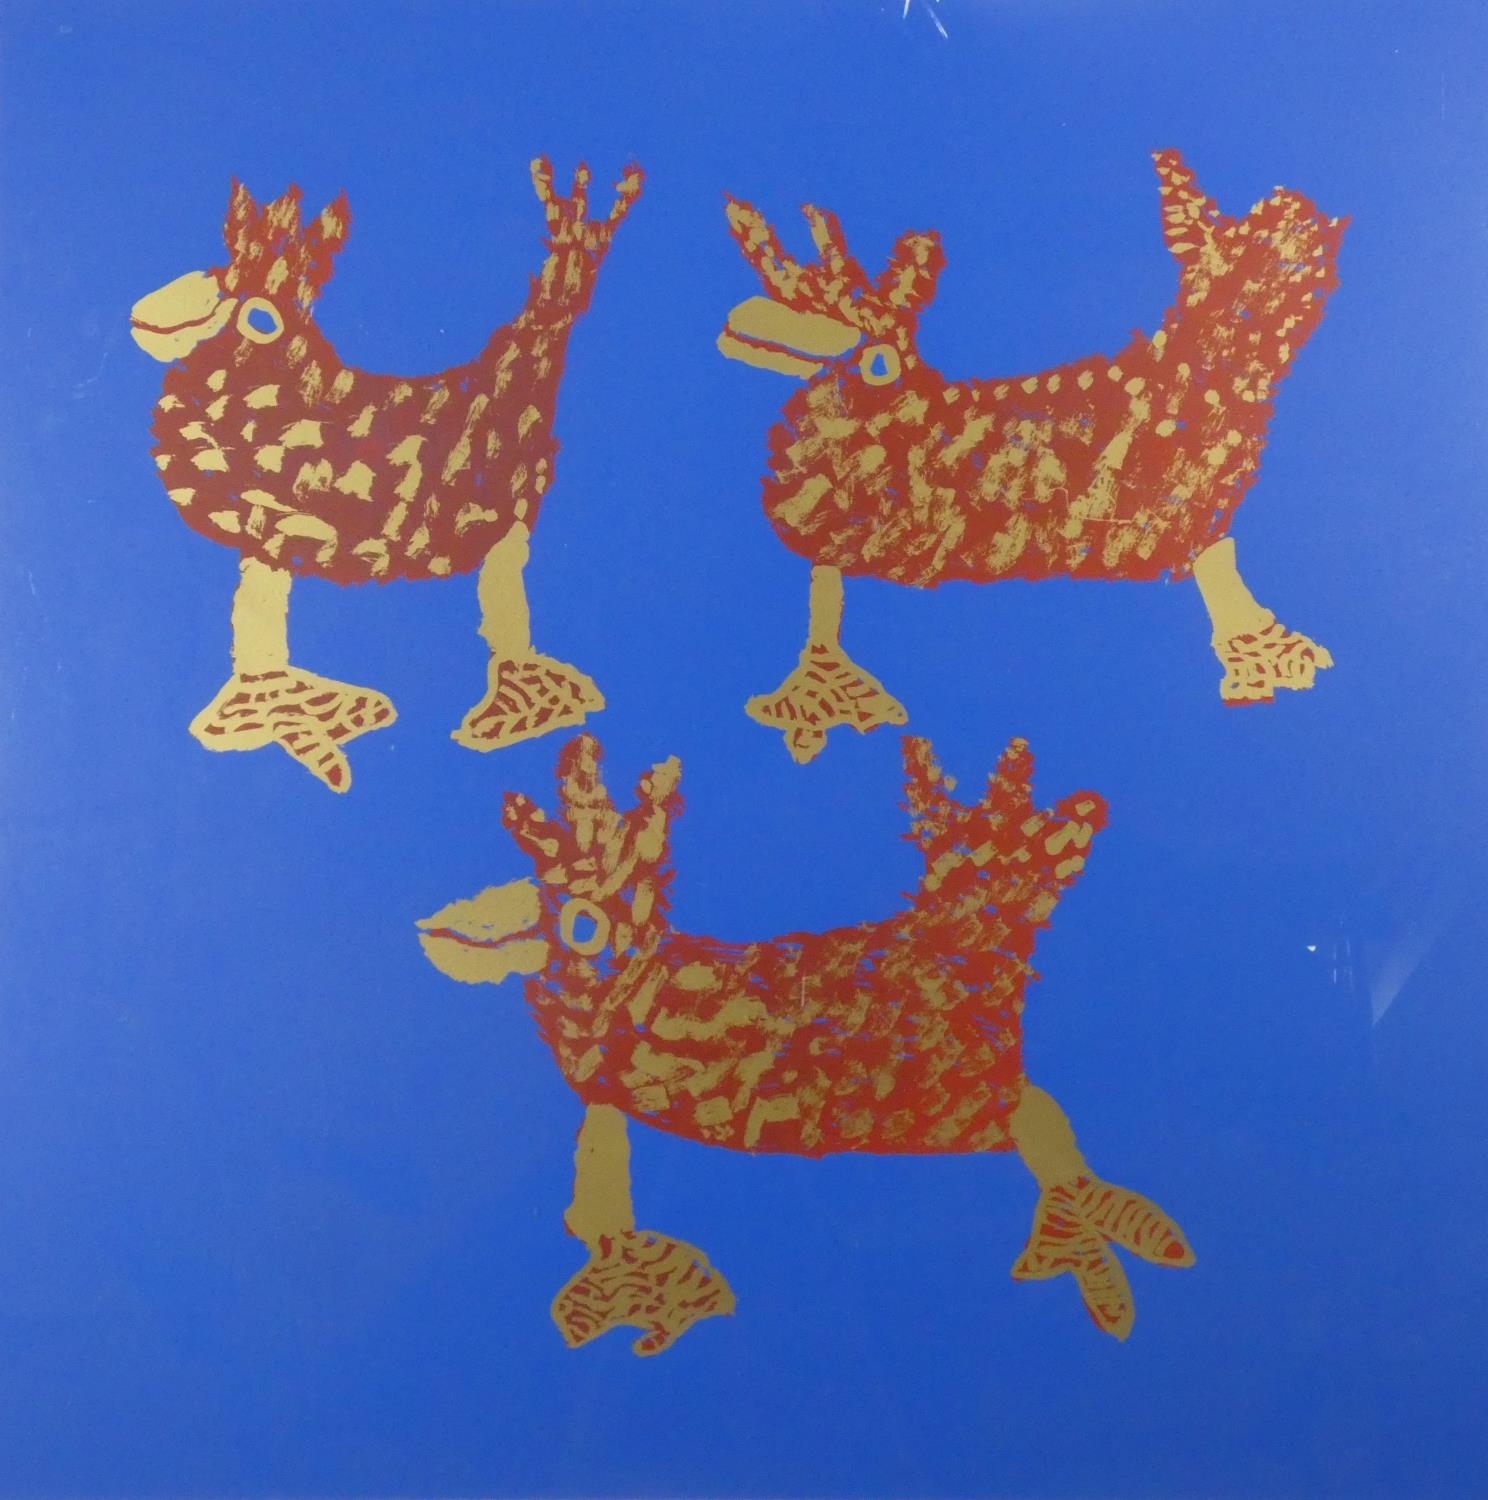 A signed limited edition print, 10th of 10, Three French Hens, Sadie Main. H.110 W.105cm